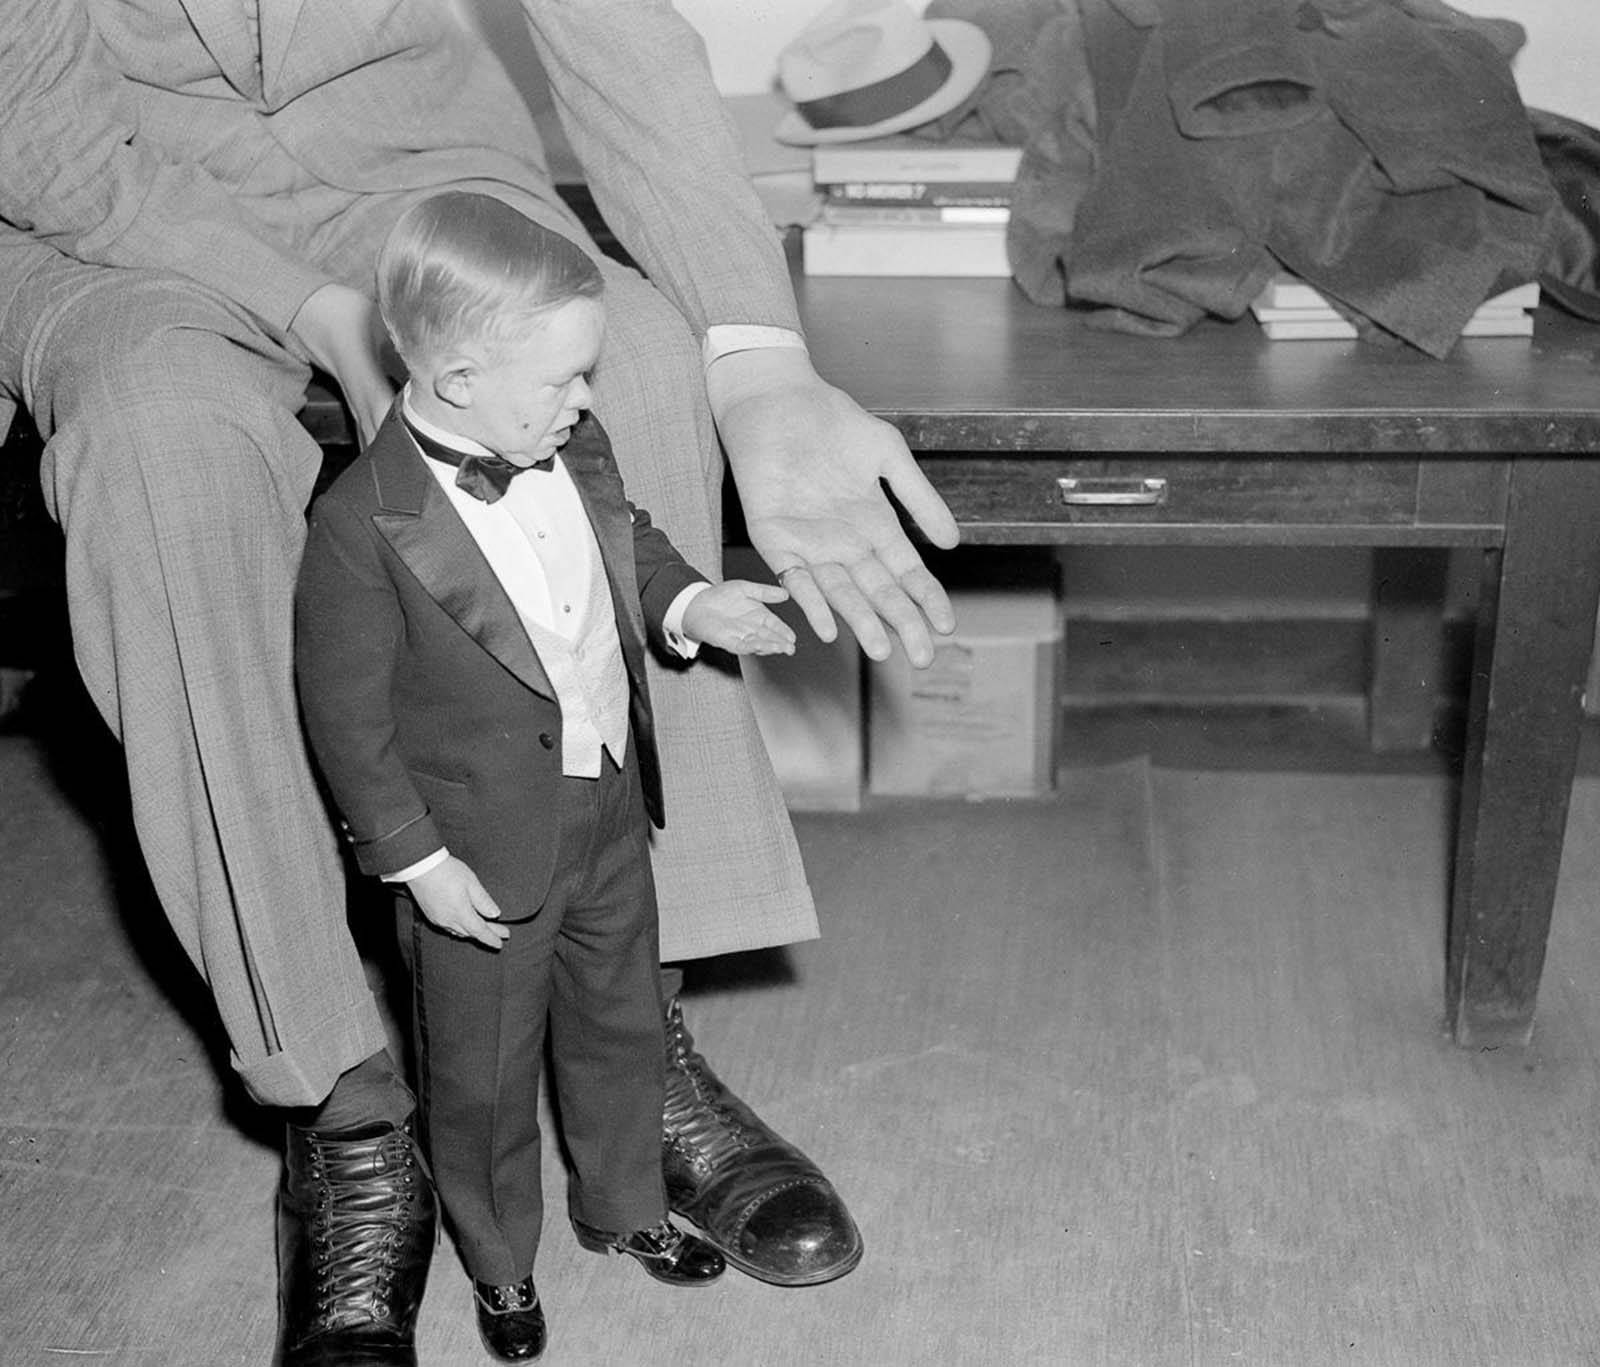 “Major Mite” of the Ringling Brothers Circus compares hand sizes with Wadlow, 1937.